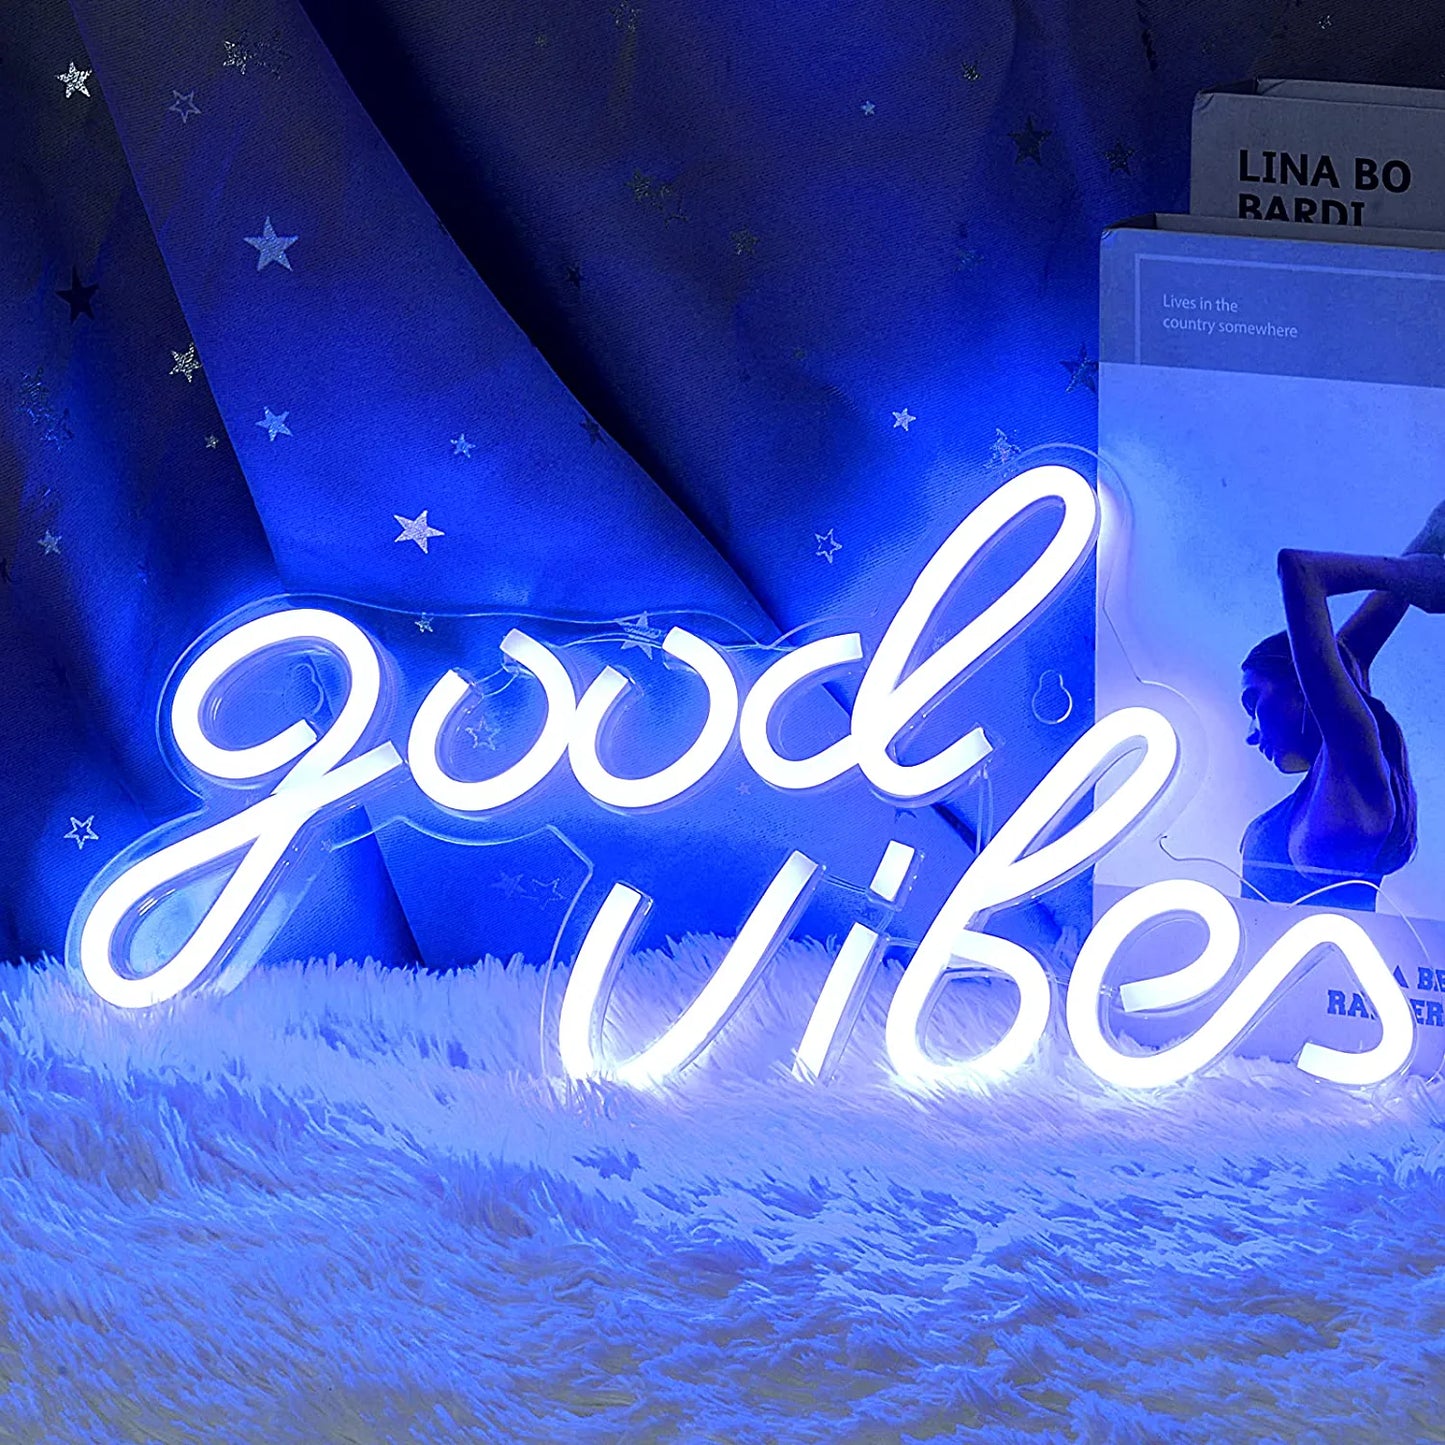 Good Vibes Led Neon Sign - NeonTitle